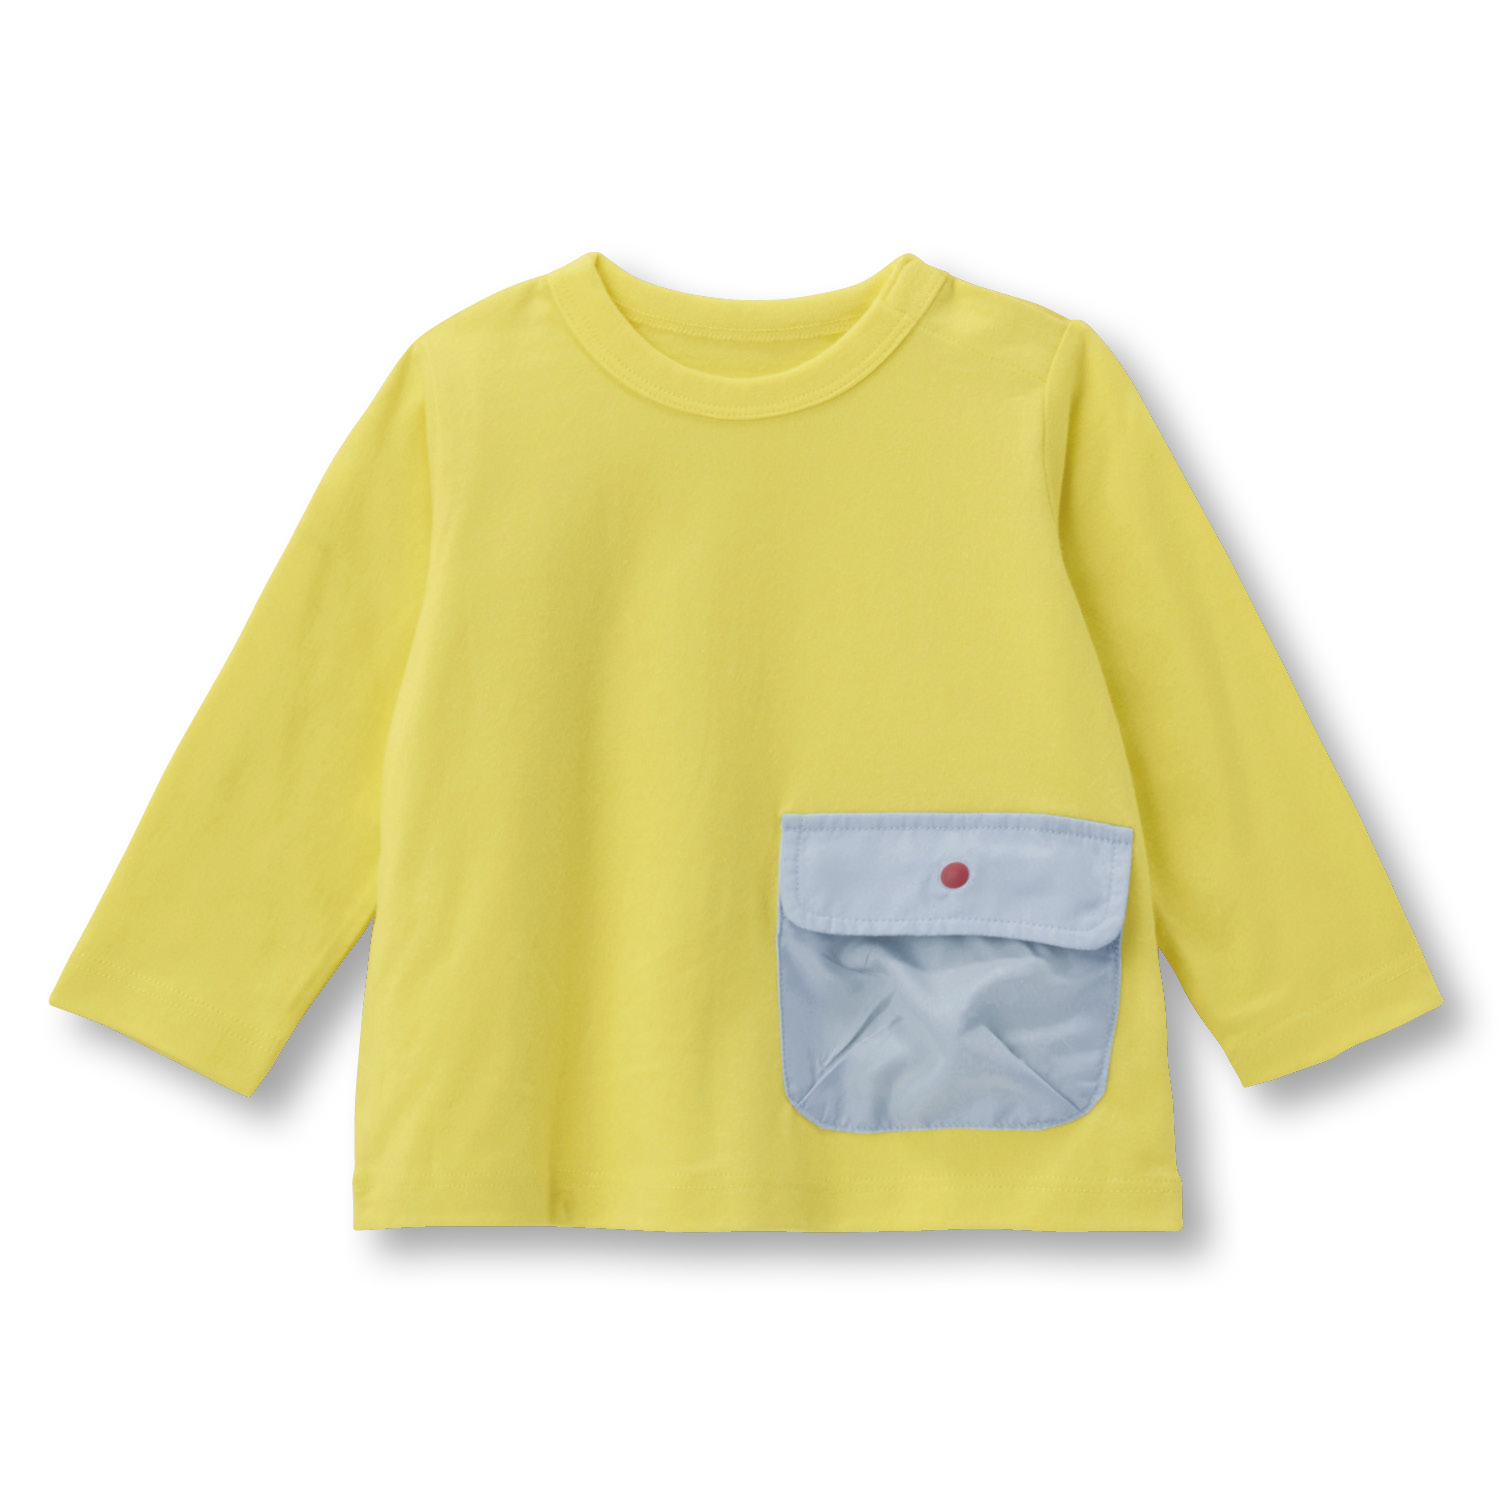 Tシャツ トップス 長袖 カットソー 子供 キッズ 子供服 男の子 ボーイズ 異素材ポケット デザイ...